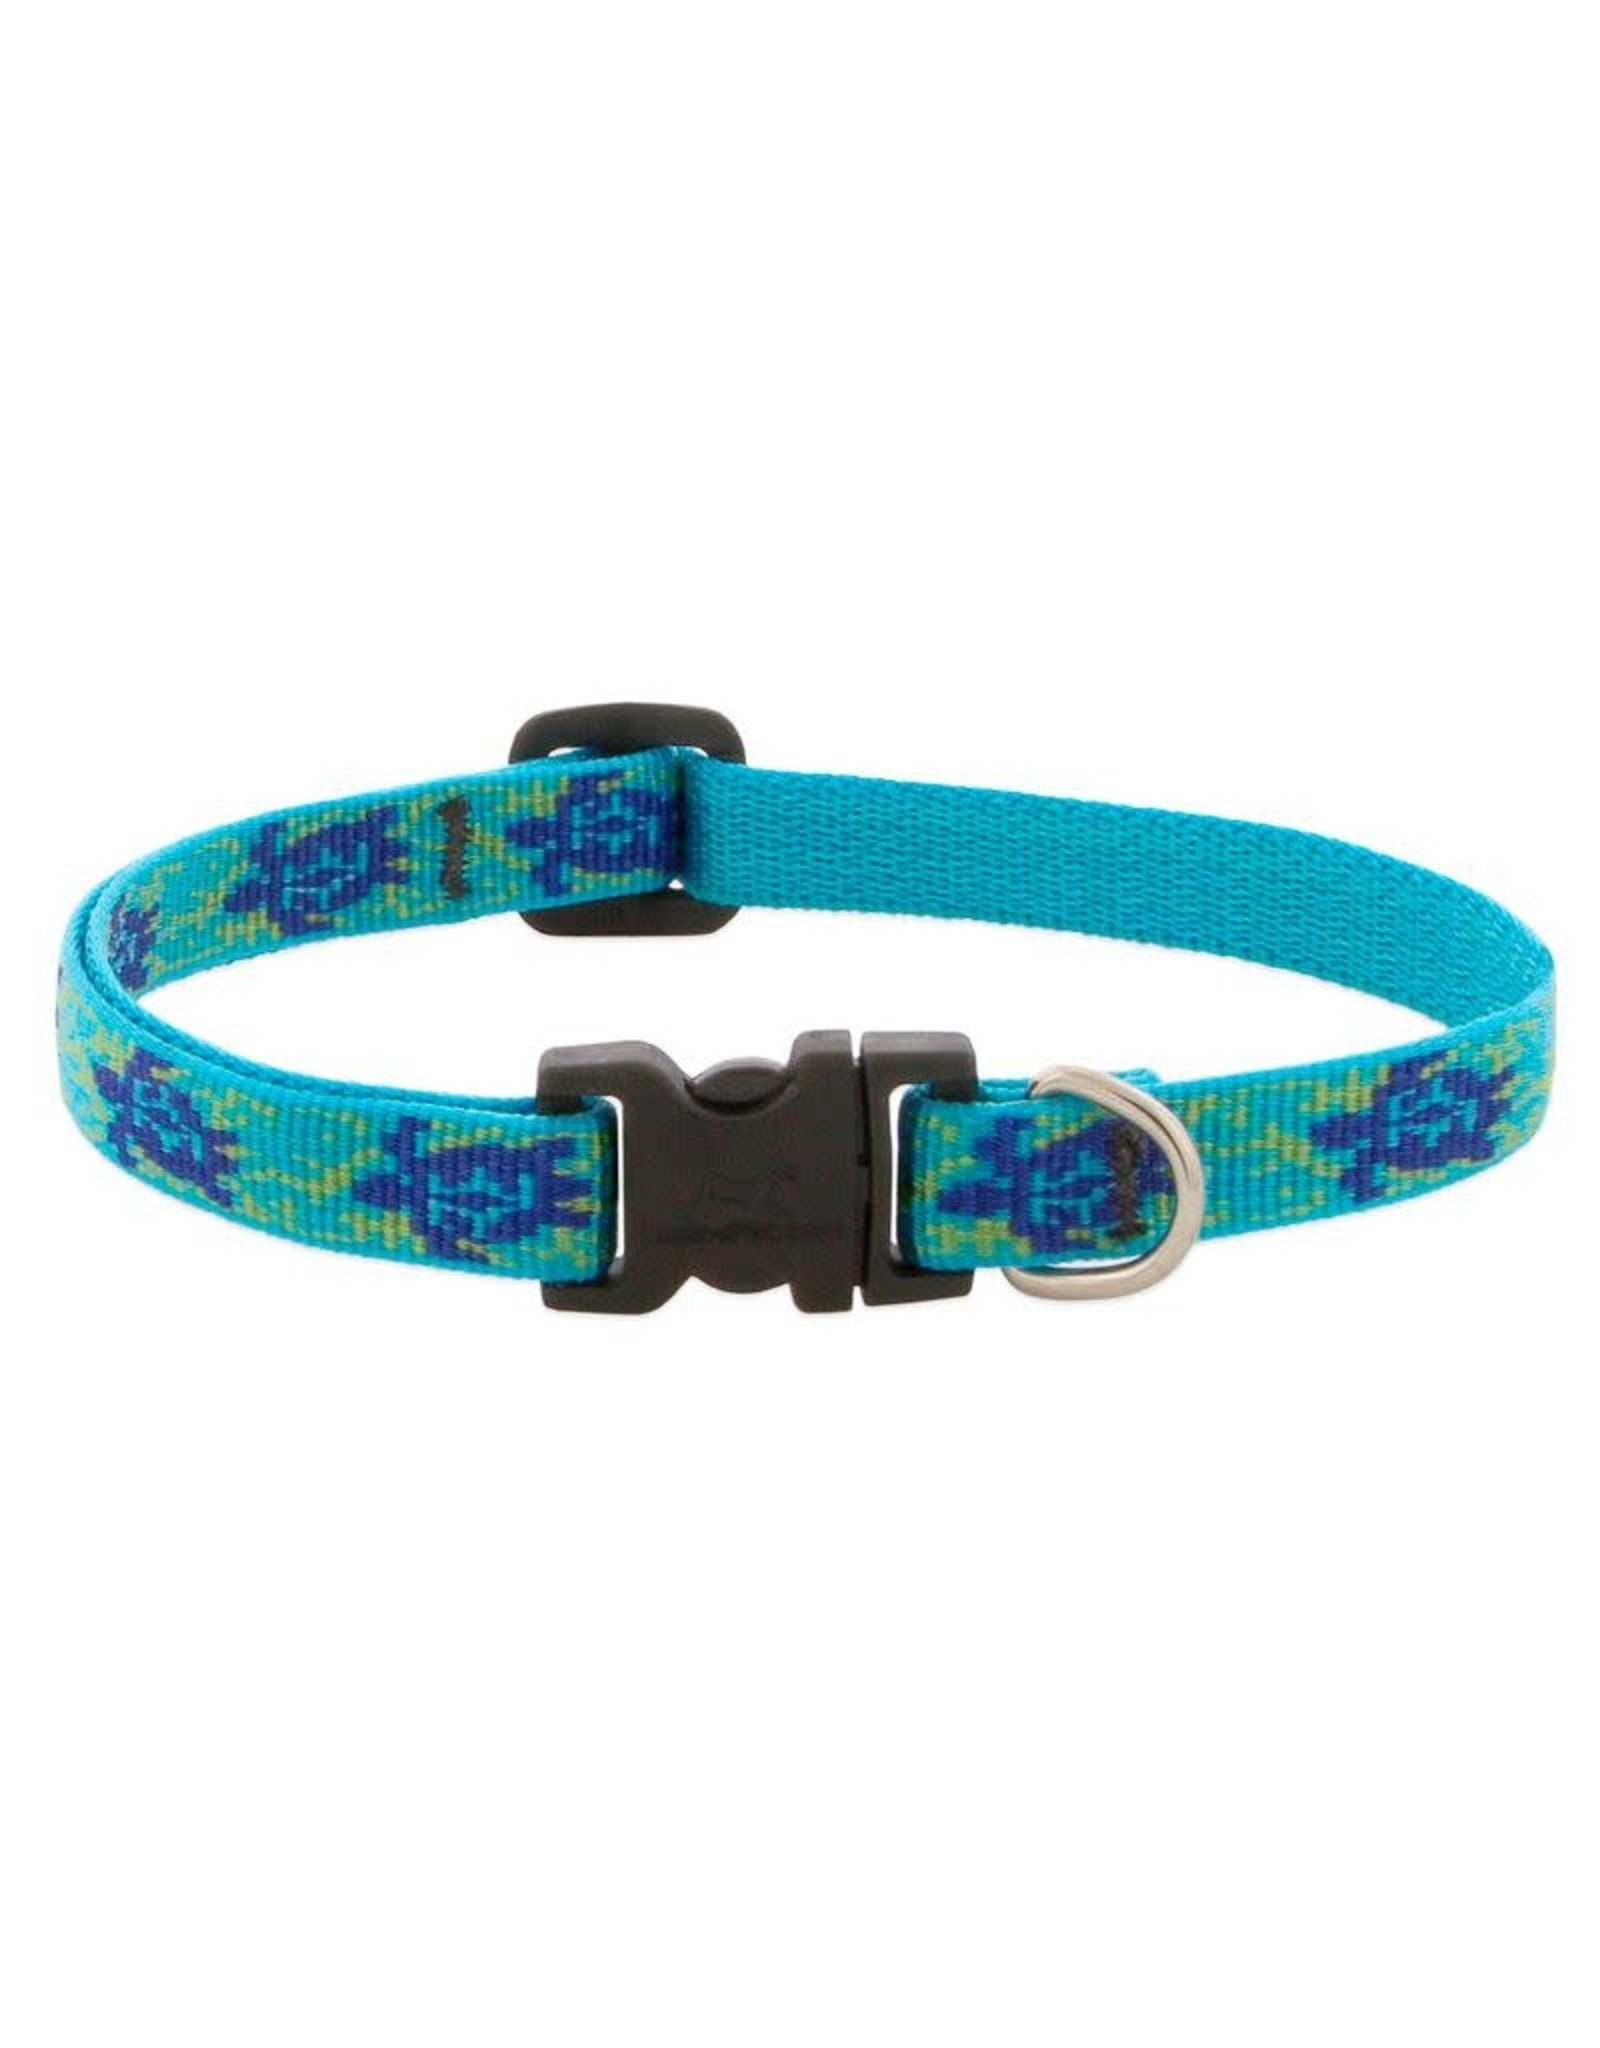 Lupine Lupine Turtle Reef Collar: 1/2 in wide, 10-16 inch